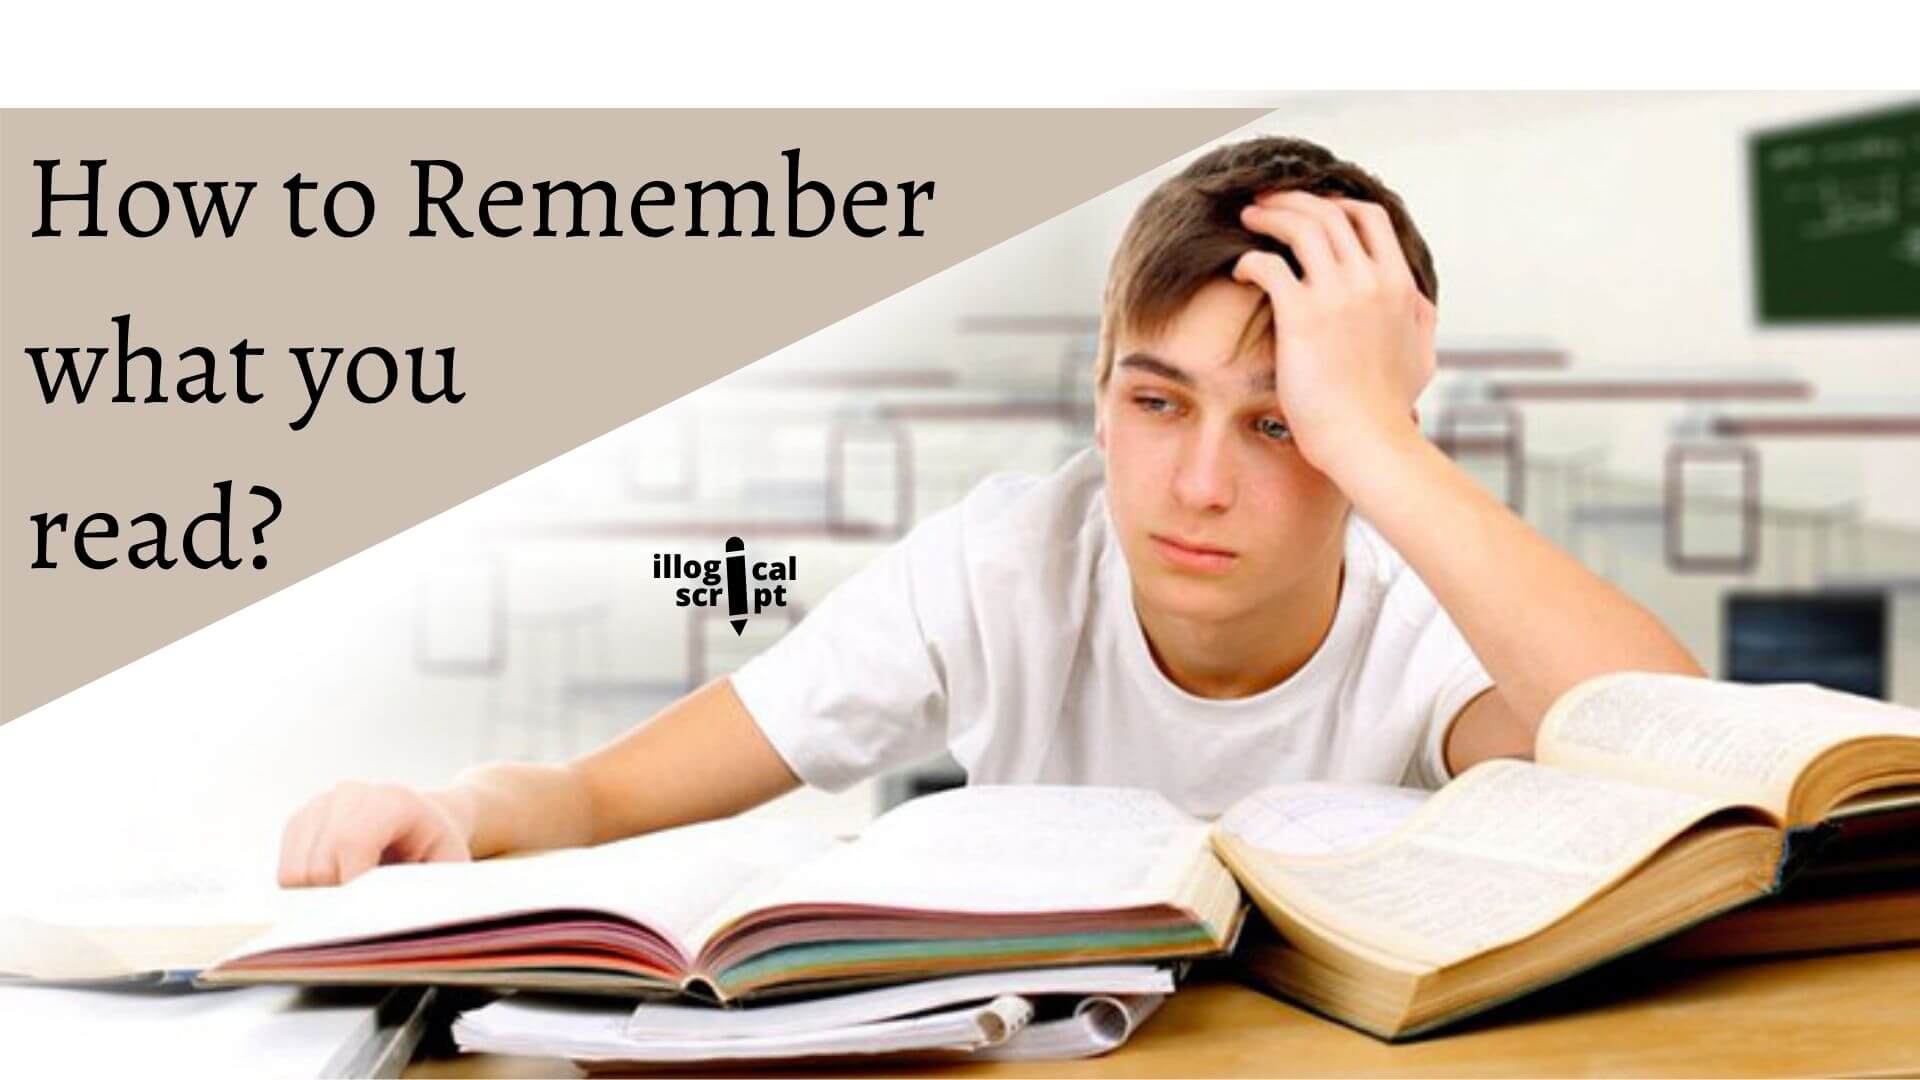 13 simple ways to remember what you read